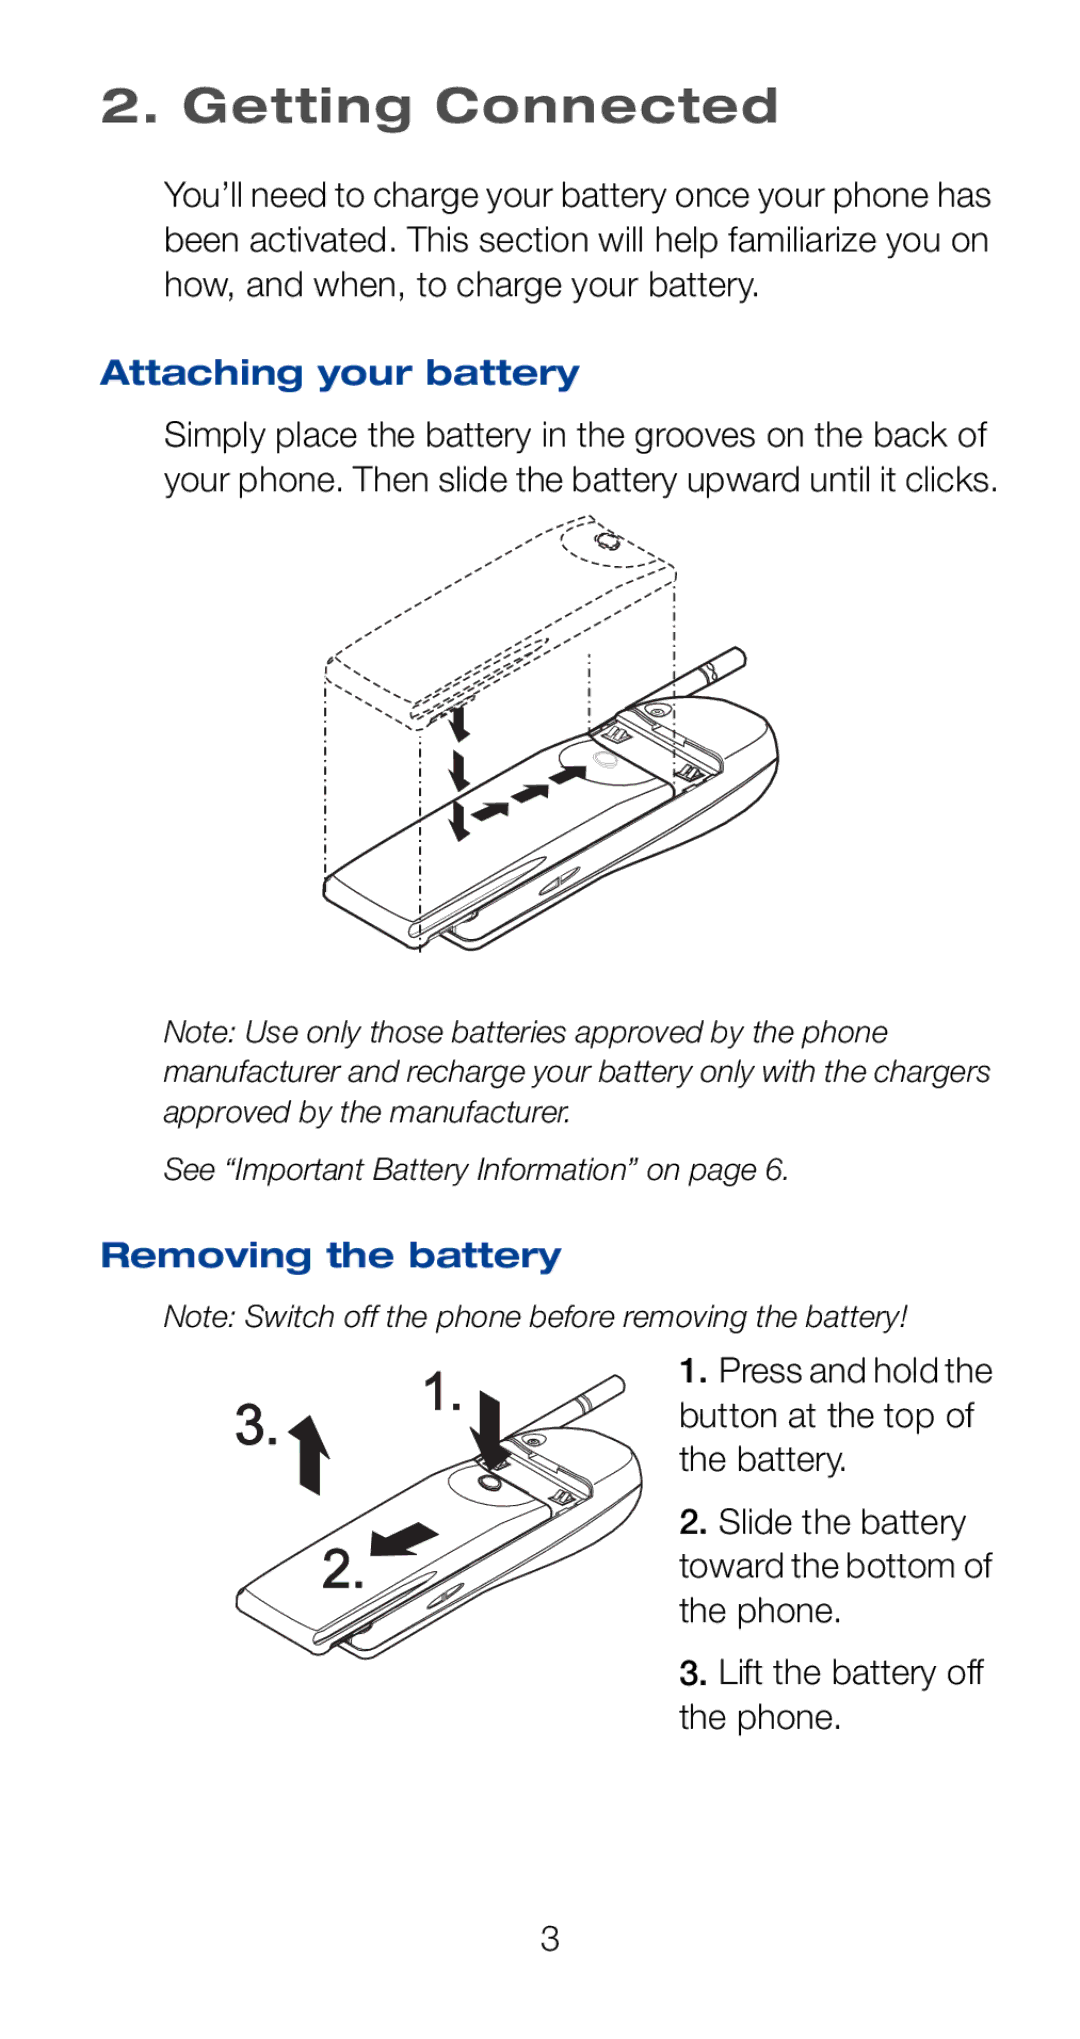 Nokia 6161i owner manual Getting Connected, Attaching your battery, Removing the battery 